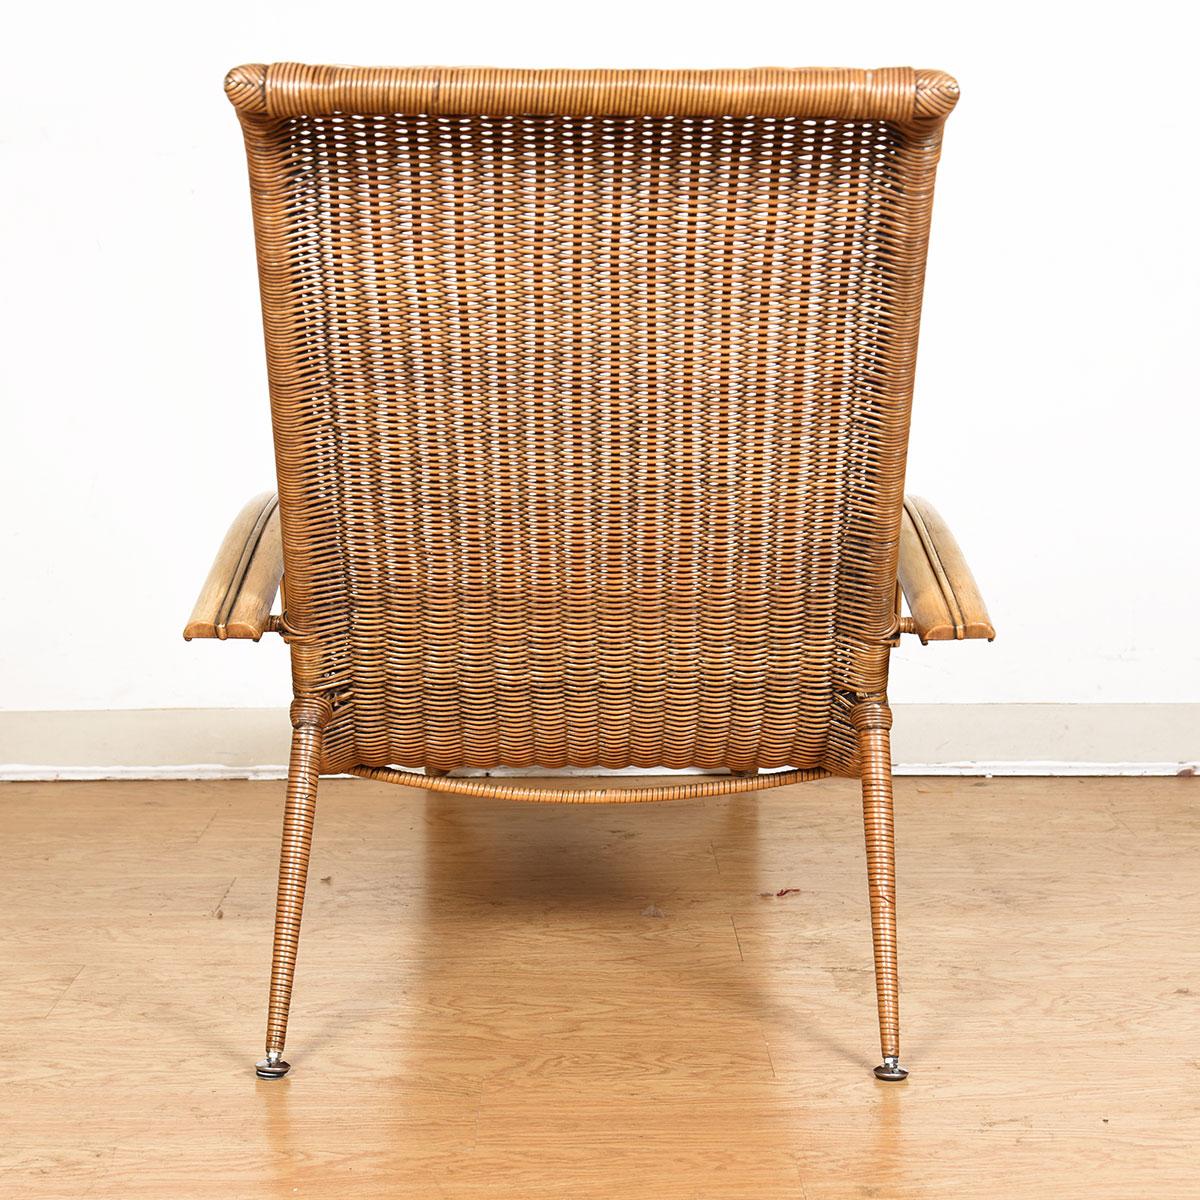 Midcentury Woven Rattan Chaise Lounge In Good Condition For Sale In Kensington, MD